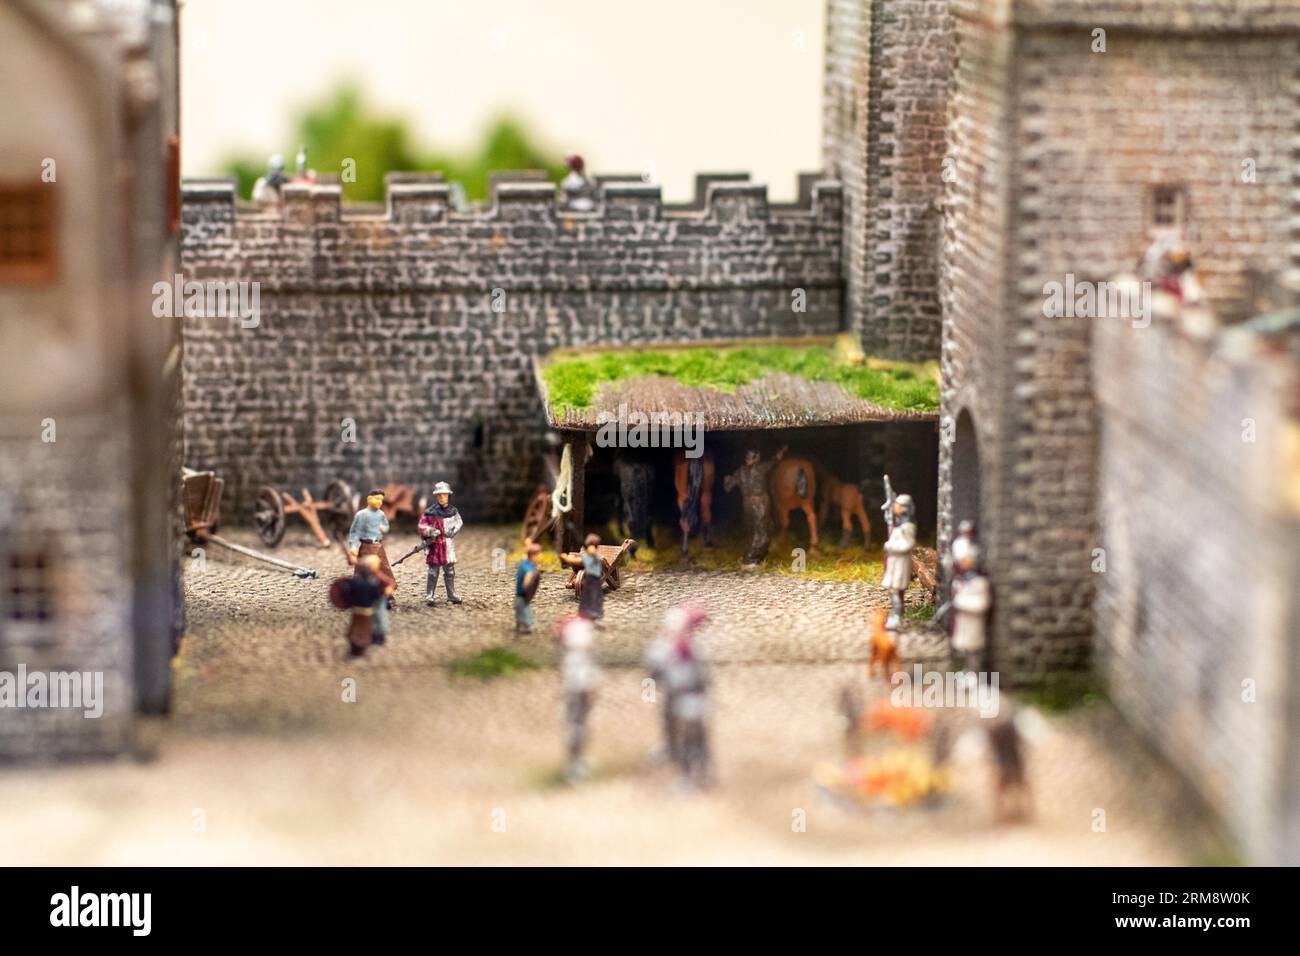 Miniature diorama at Miniatur Wunderland in Hamburg, Germany, depicting a historical scene with people going about their daily lives inside a castle Stock Photo